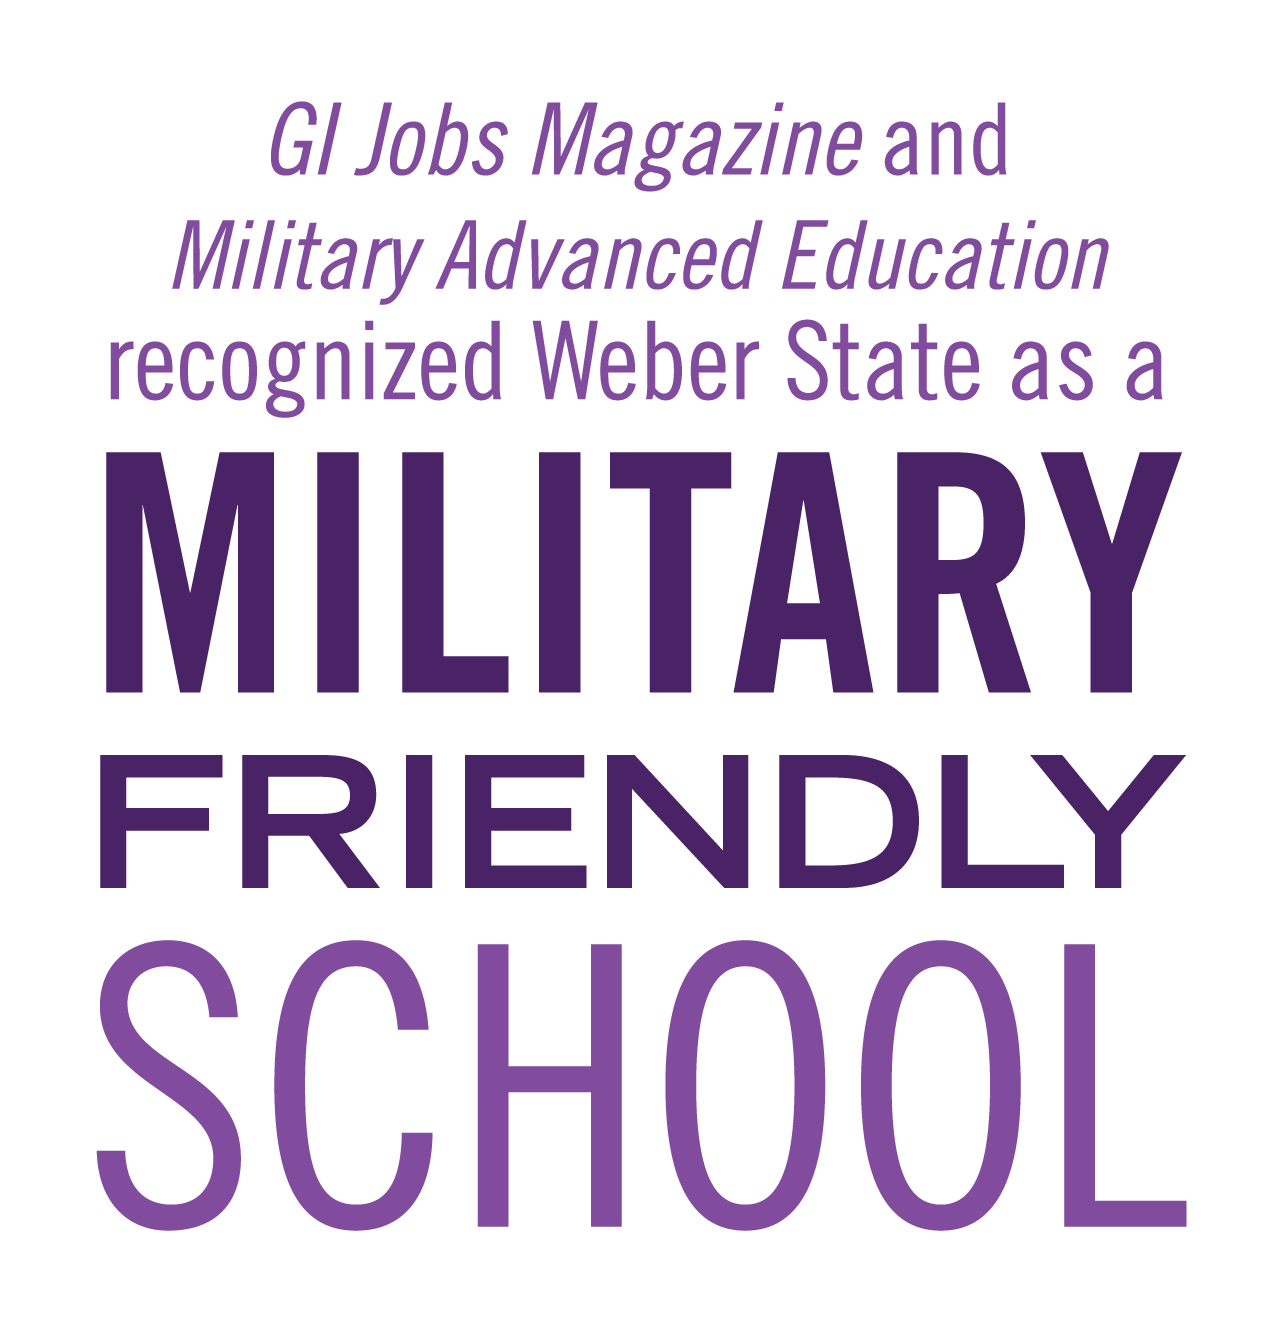 GI jobs magazine and military advanced education recognized weber state as a military friendly school